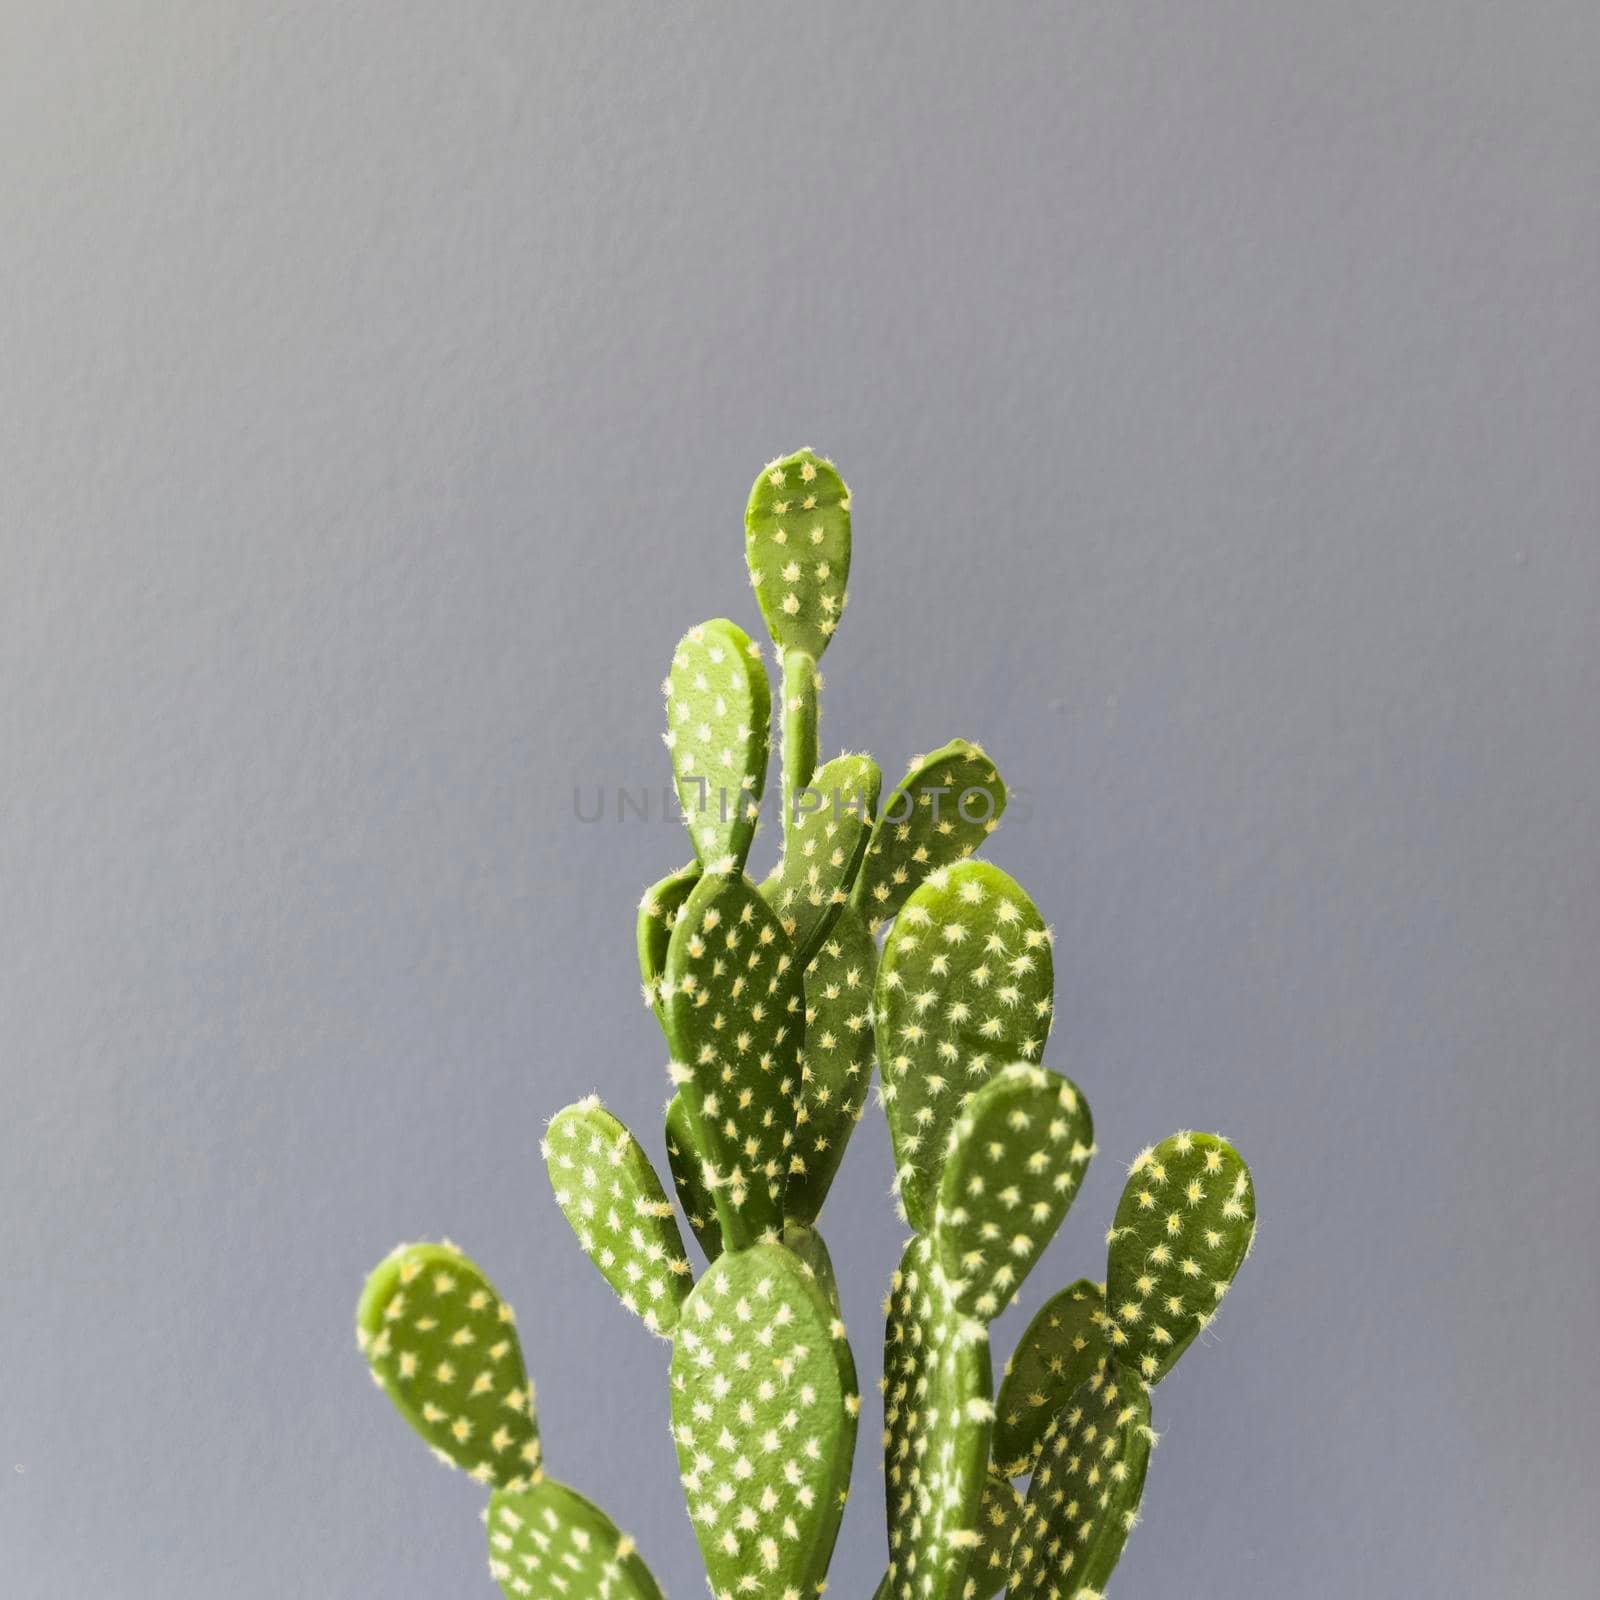 office cactus. High resolution photo